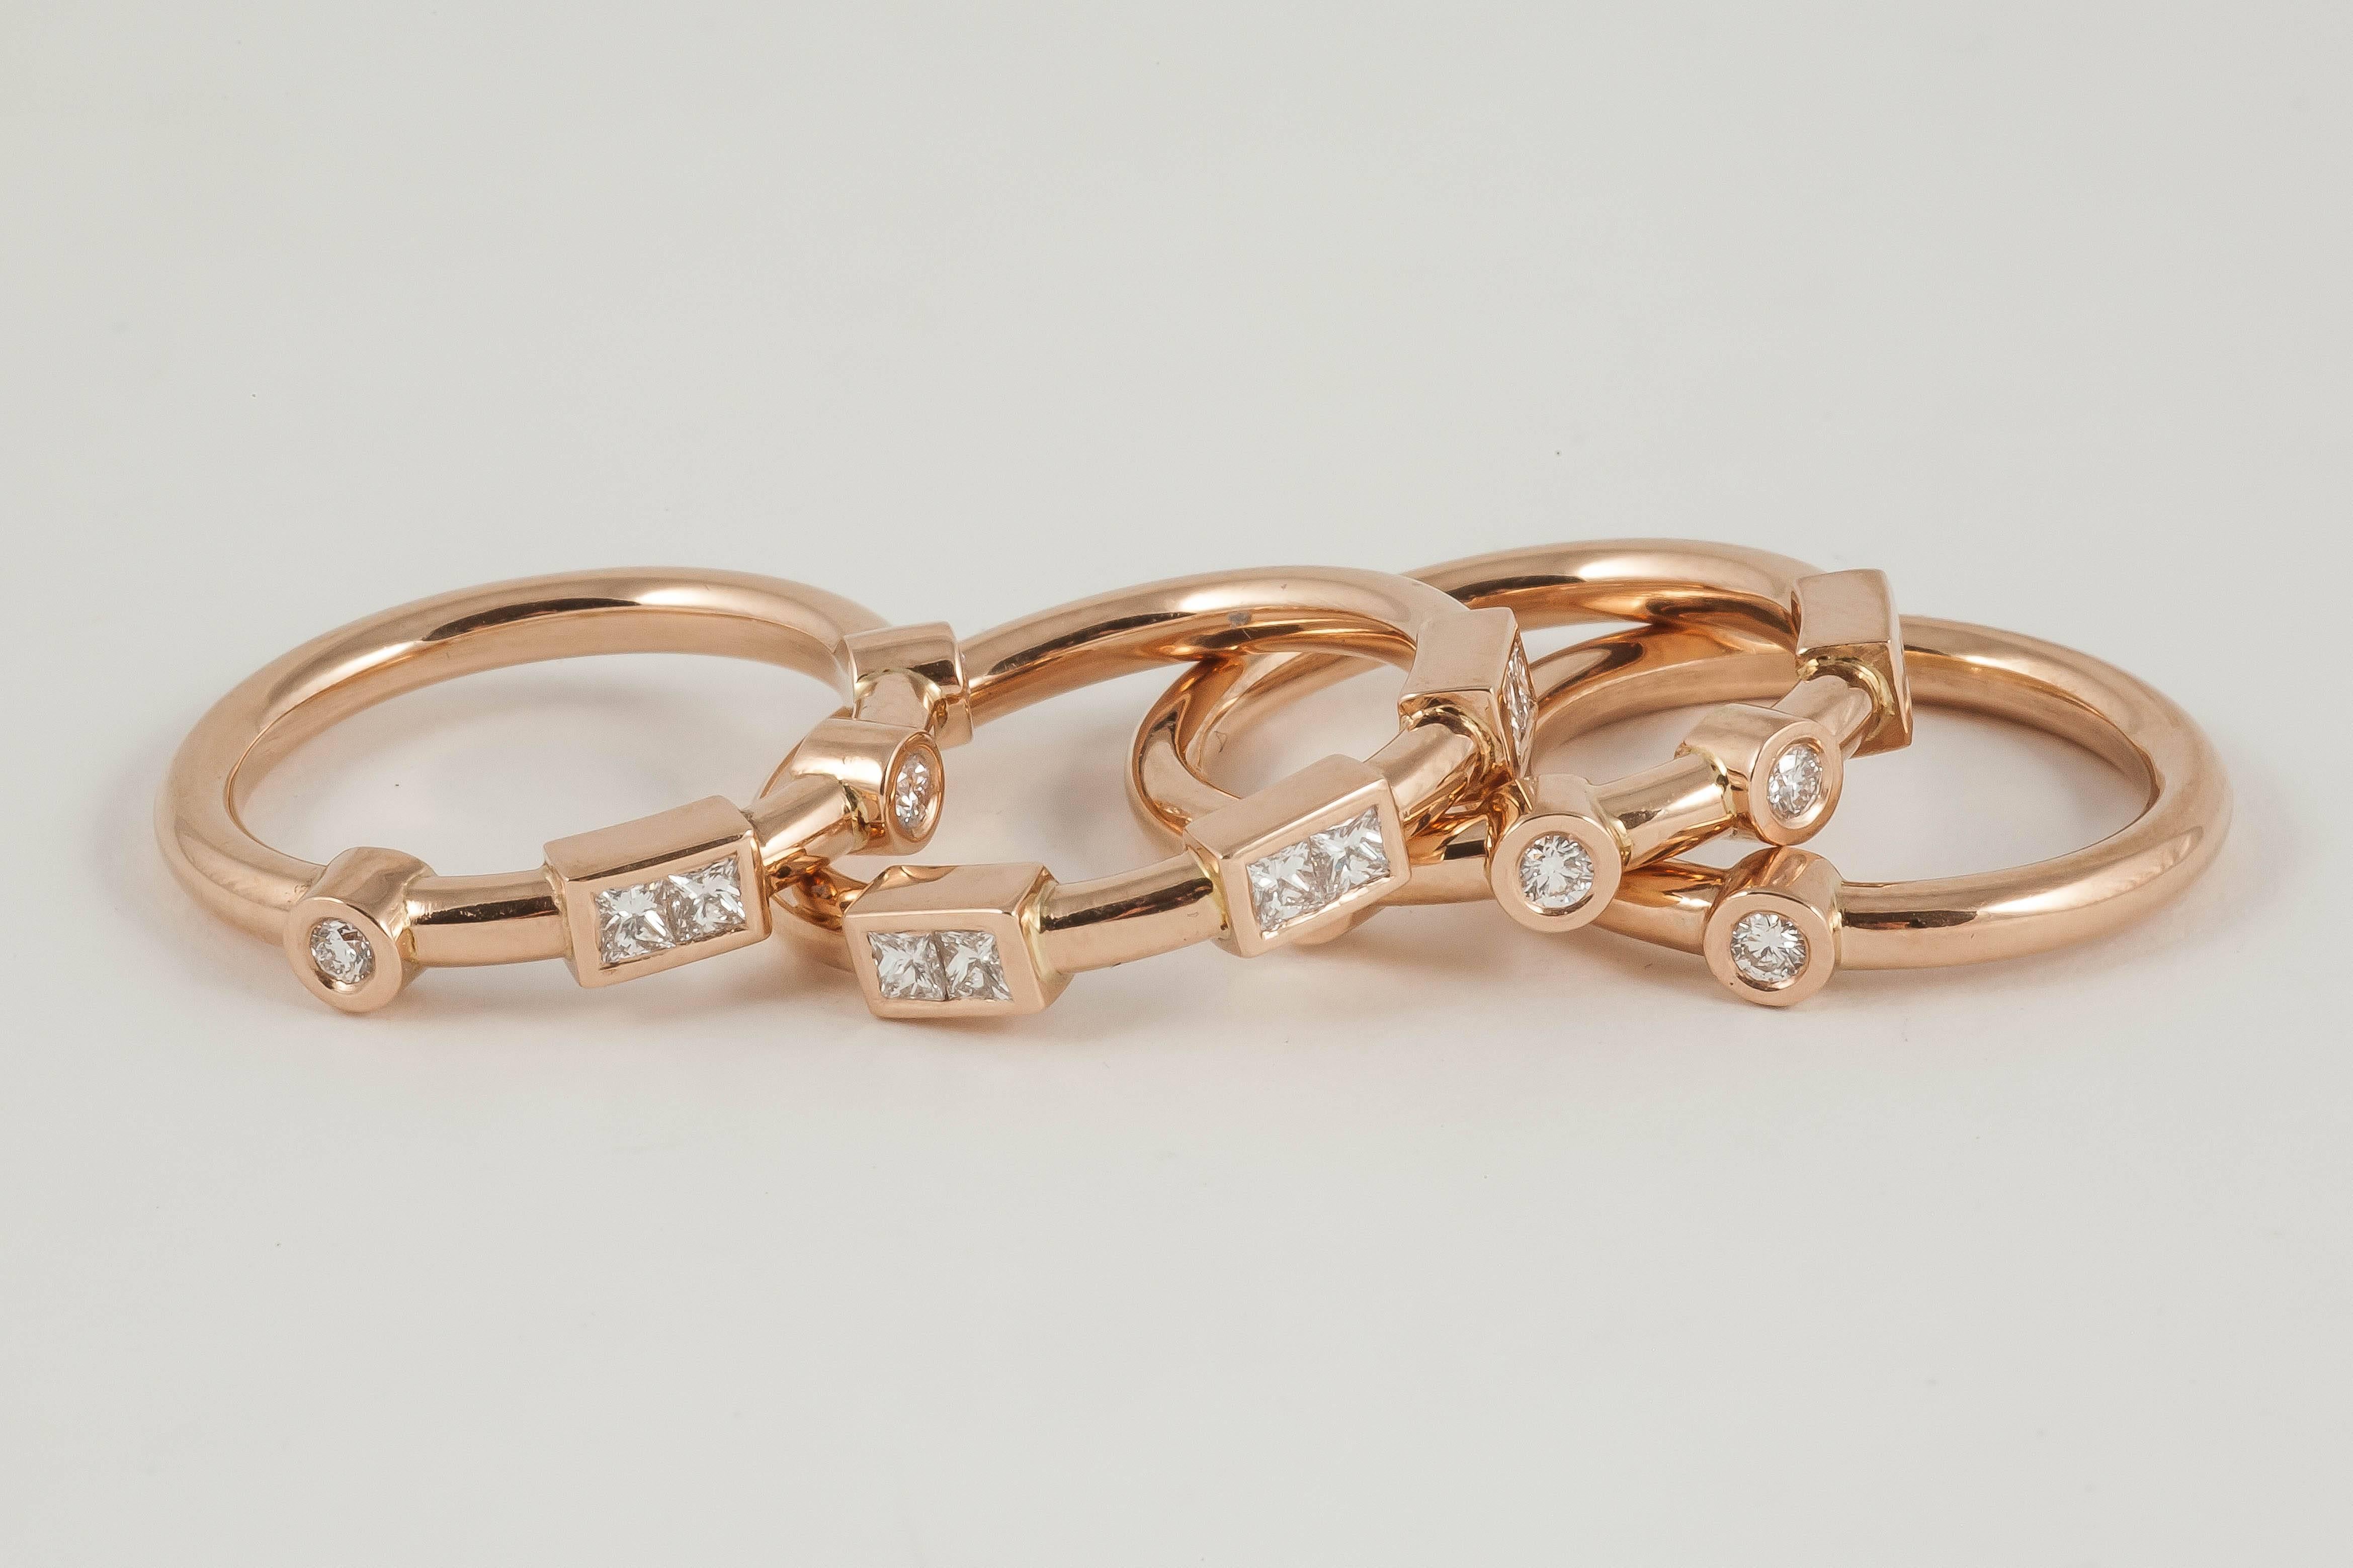 Code by Edge uses the dots and dashes of Morse Code to conceal hidden messages within beautiful jewellery. The 'LOVE' combination is a suite of 4 hand-made 18ct Rose Gold rings, set with the rarest premium cut Russian diamonds of D Exceptional White